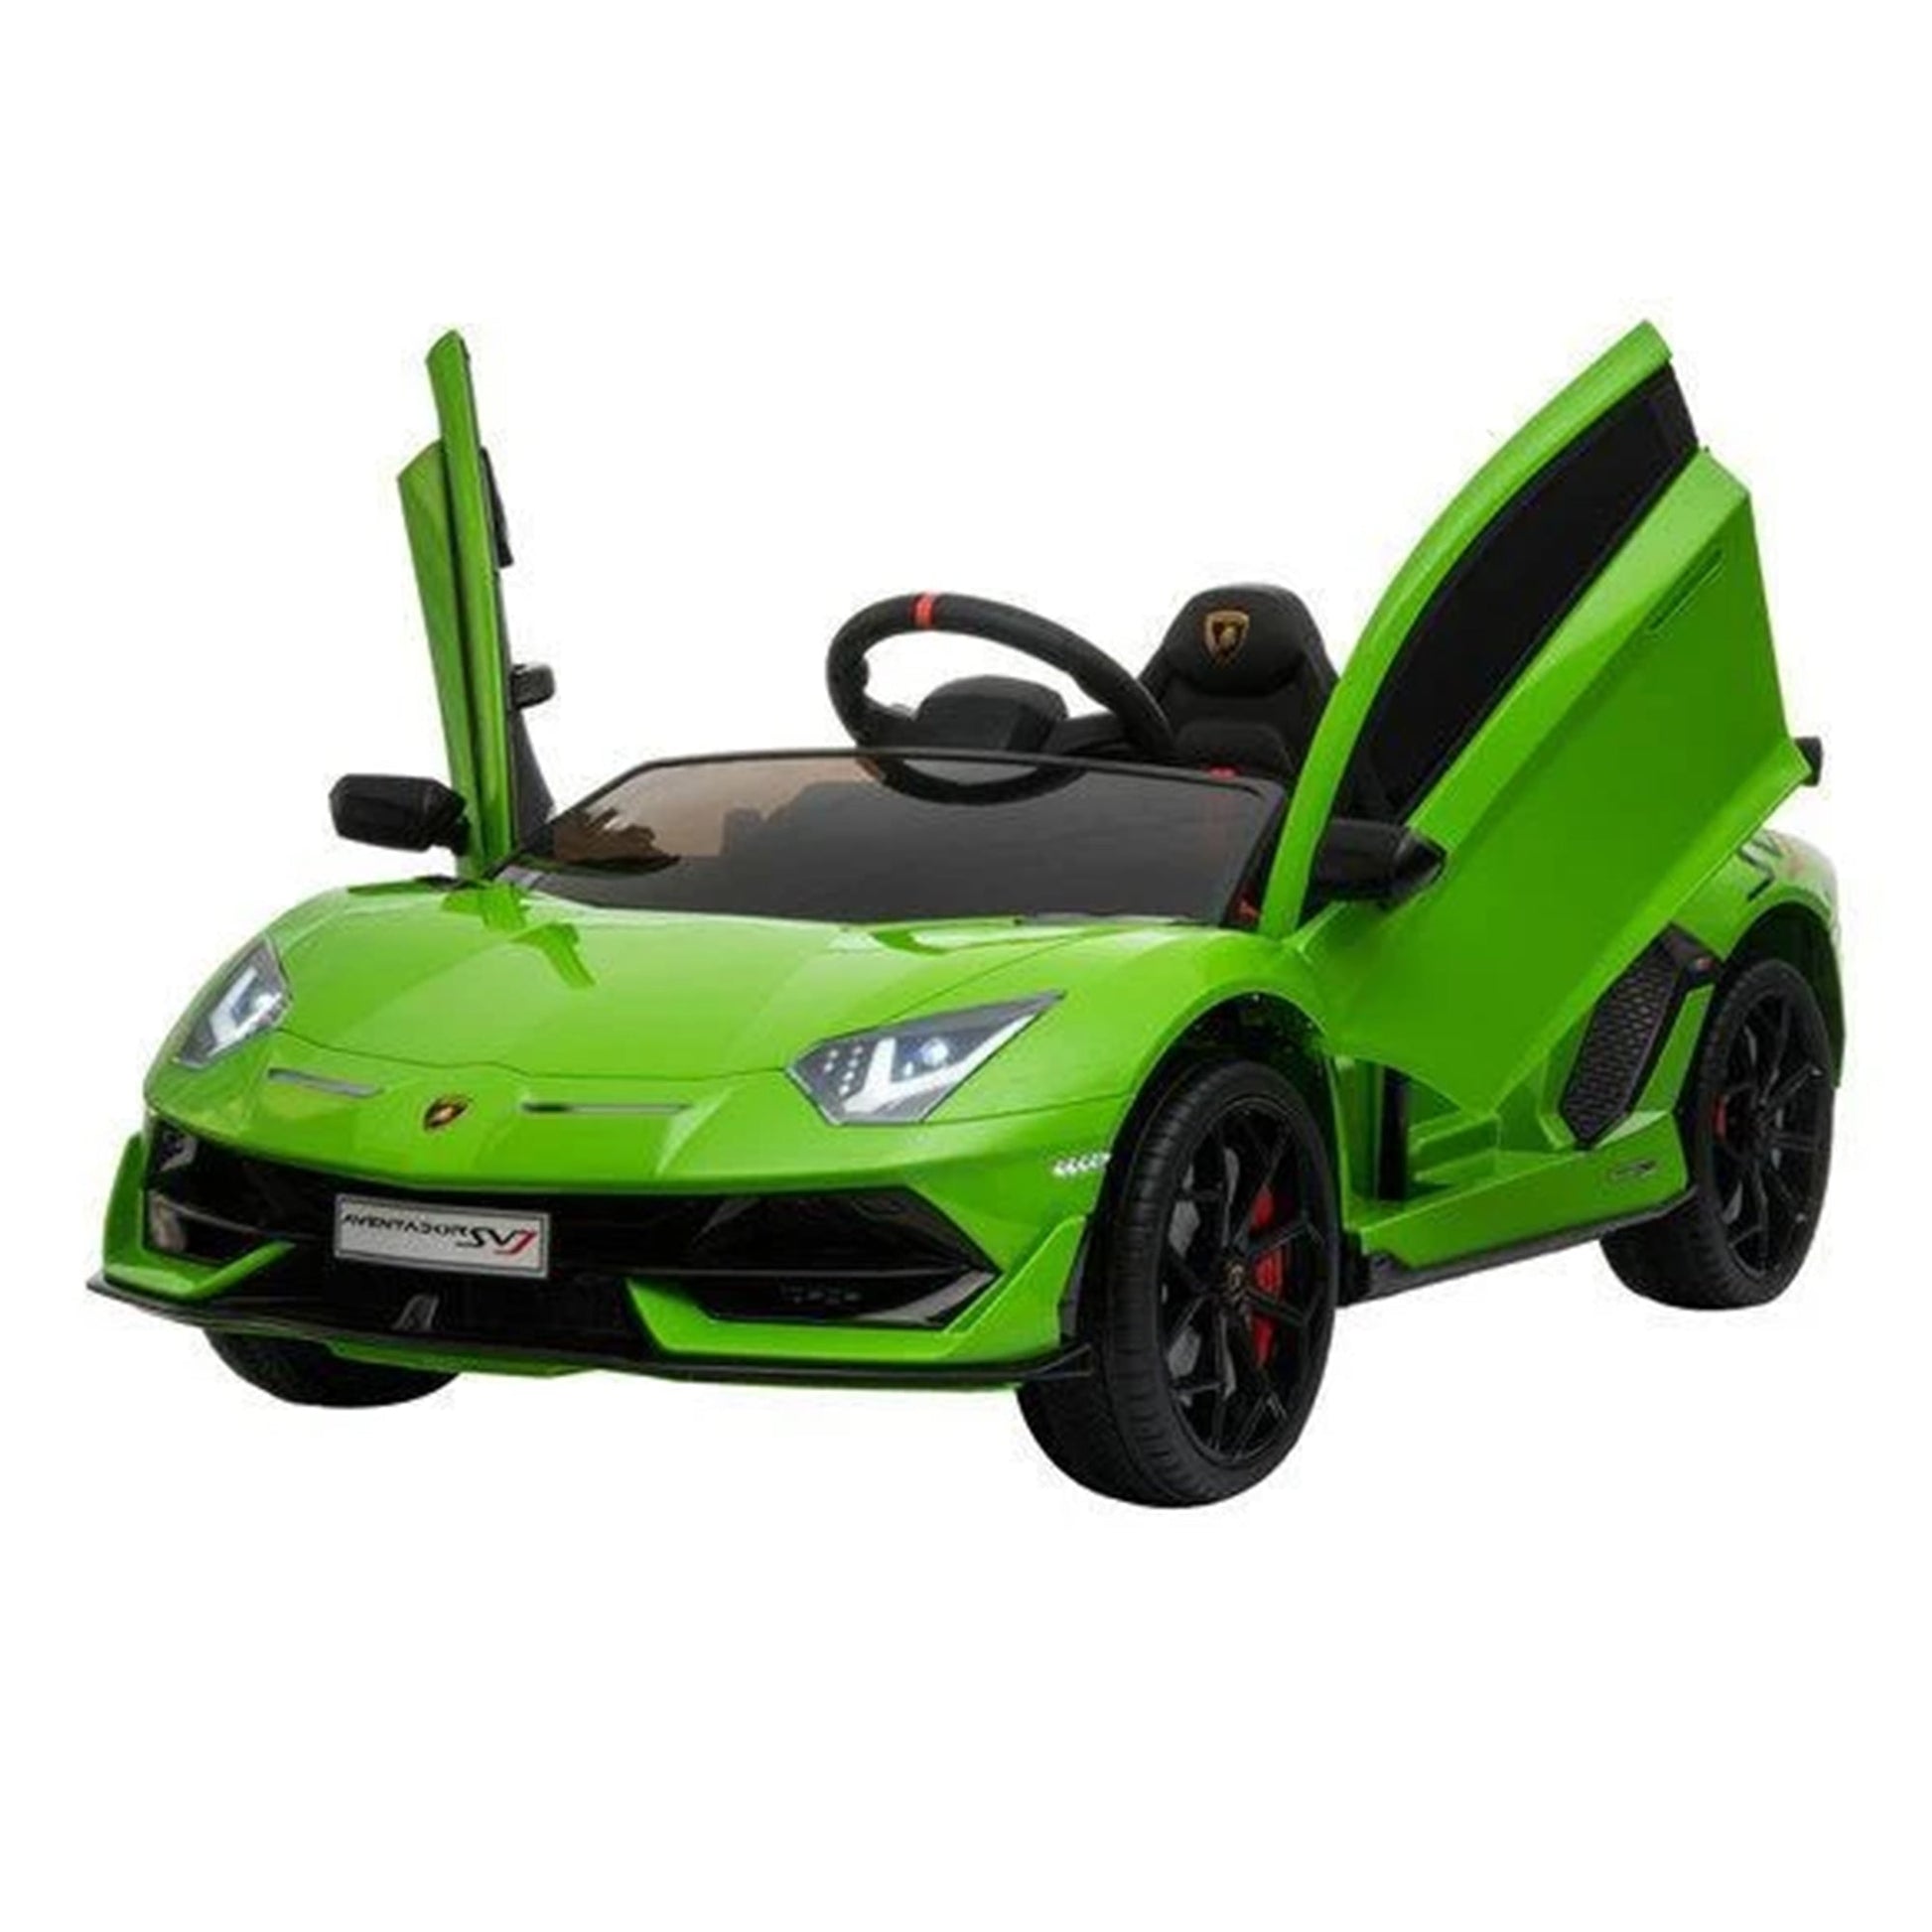 "Green Lamborghini SVJ ride-on toy car with parental remote control, exclusively available at Kids Car store."